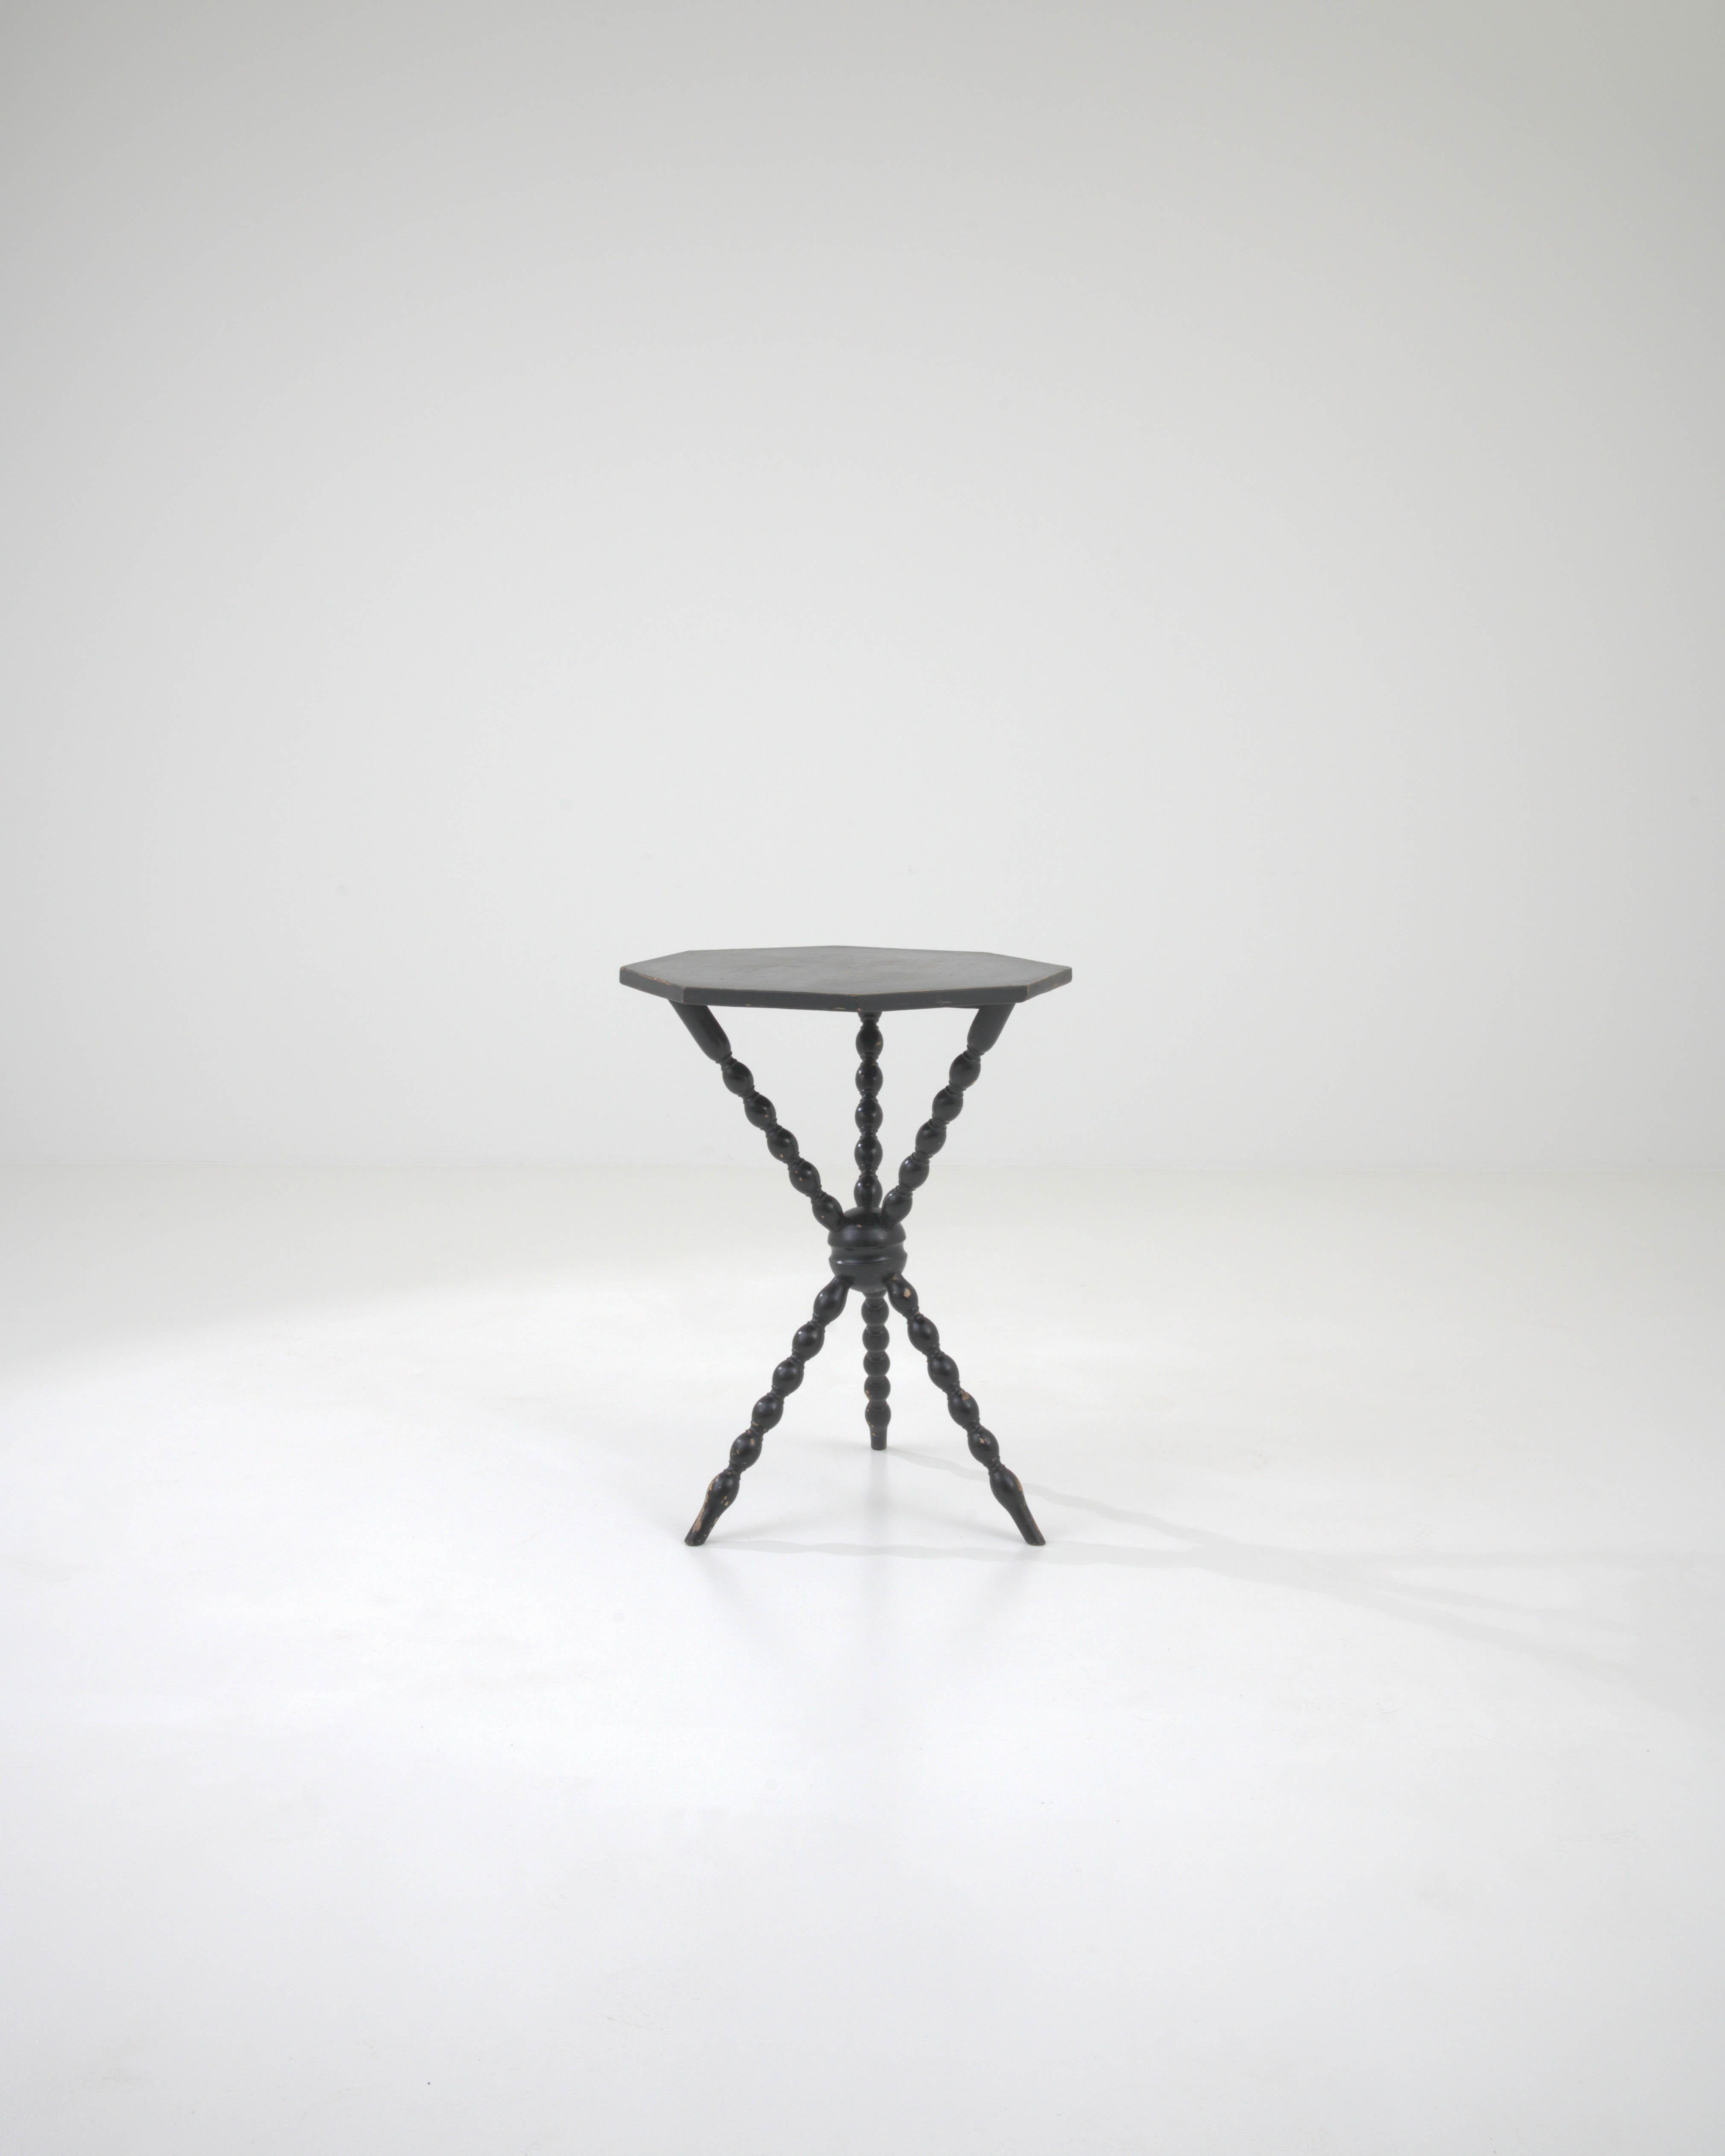 Imbued with a sense of storied elegance, this 19th Century French Wood Side Table features a black patina that whispers tales of bygone sophistication. The octagonal top, edged with hints of wear, rests on a striking base of turned spindle legs that